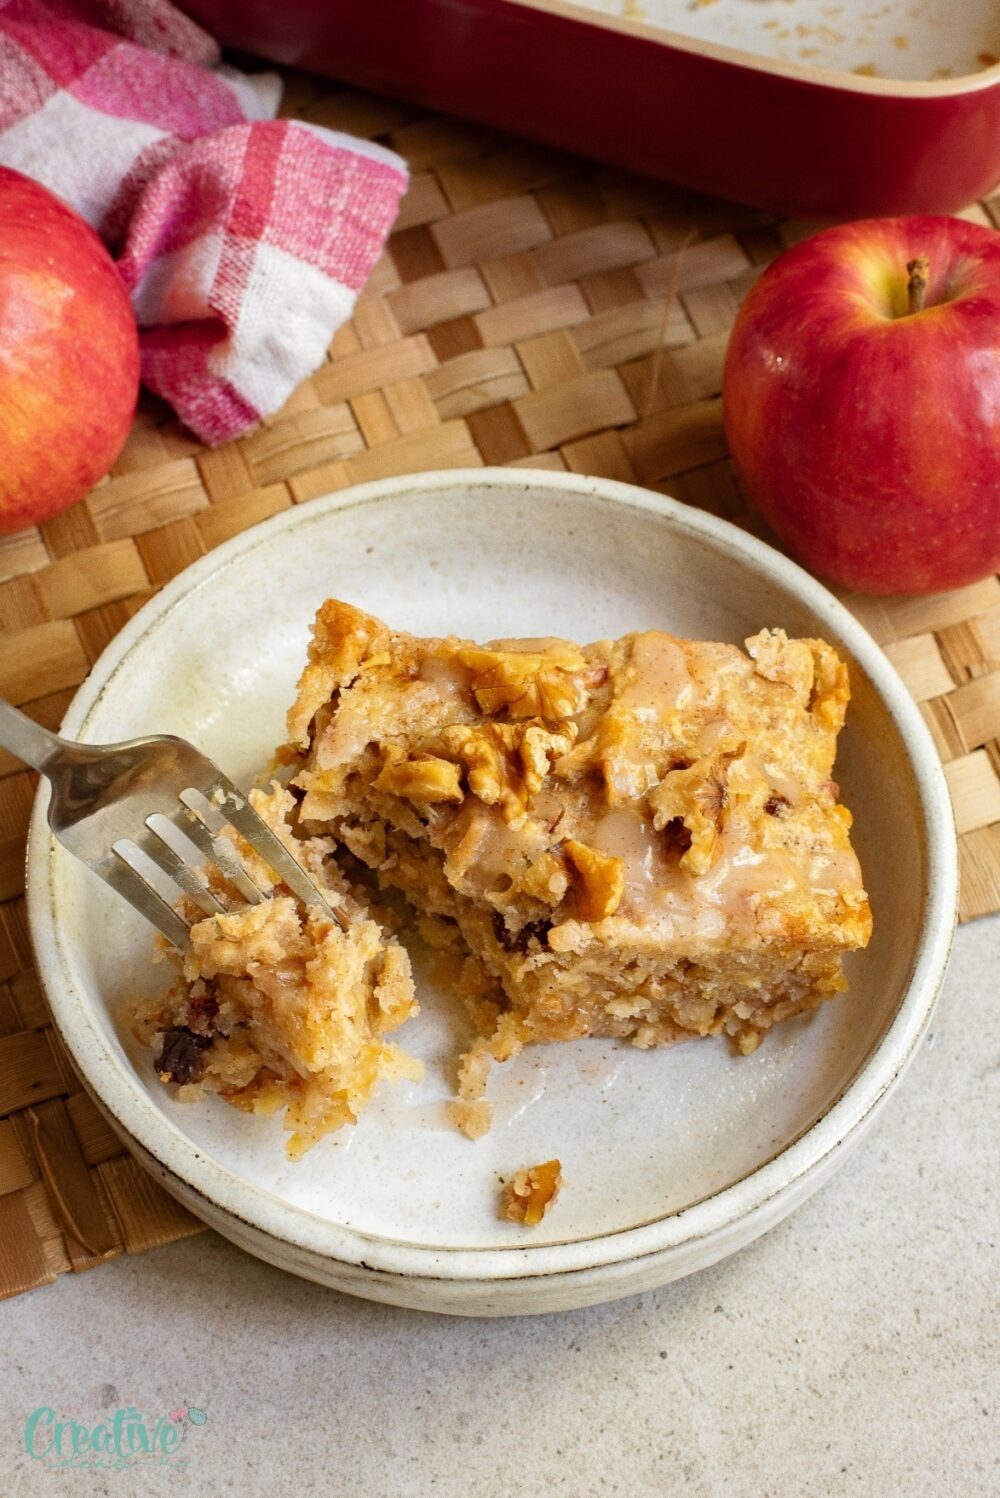 Yummy apple cake with cinnamon with sweet apples and a hint of cinnamon.